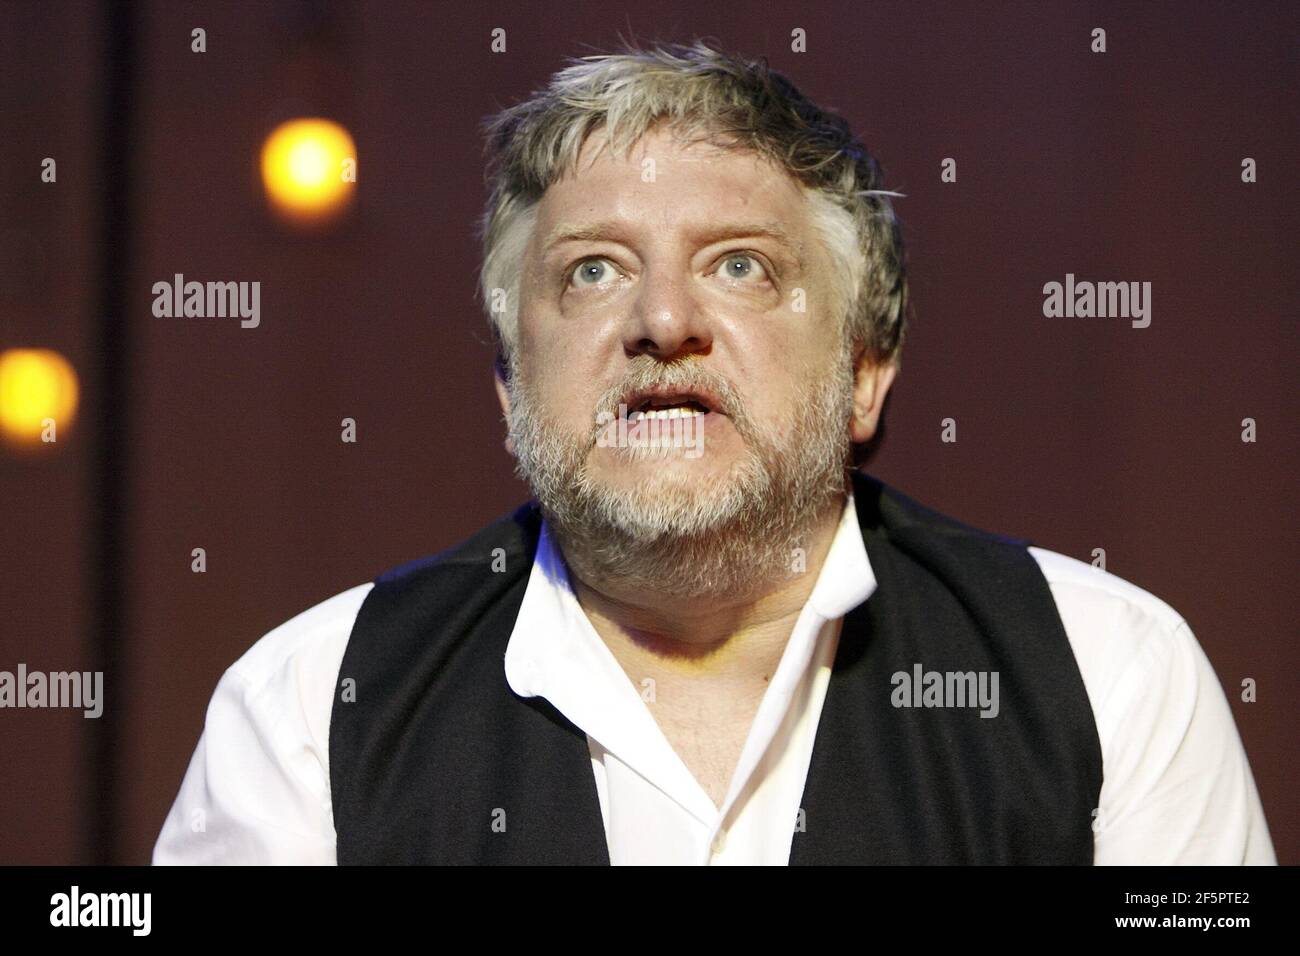 Simon Russell Beale (Leontes) in THE WINTER'S TALE by Shakespeare at the Old Vic Theatre, London SE1  09/06/2009  The Bridge Project  set design: Anthony Ward  costumes: Catherine Zuber  lighting: Paul Pyant  director: Sam Mendes Stock Photo